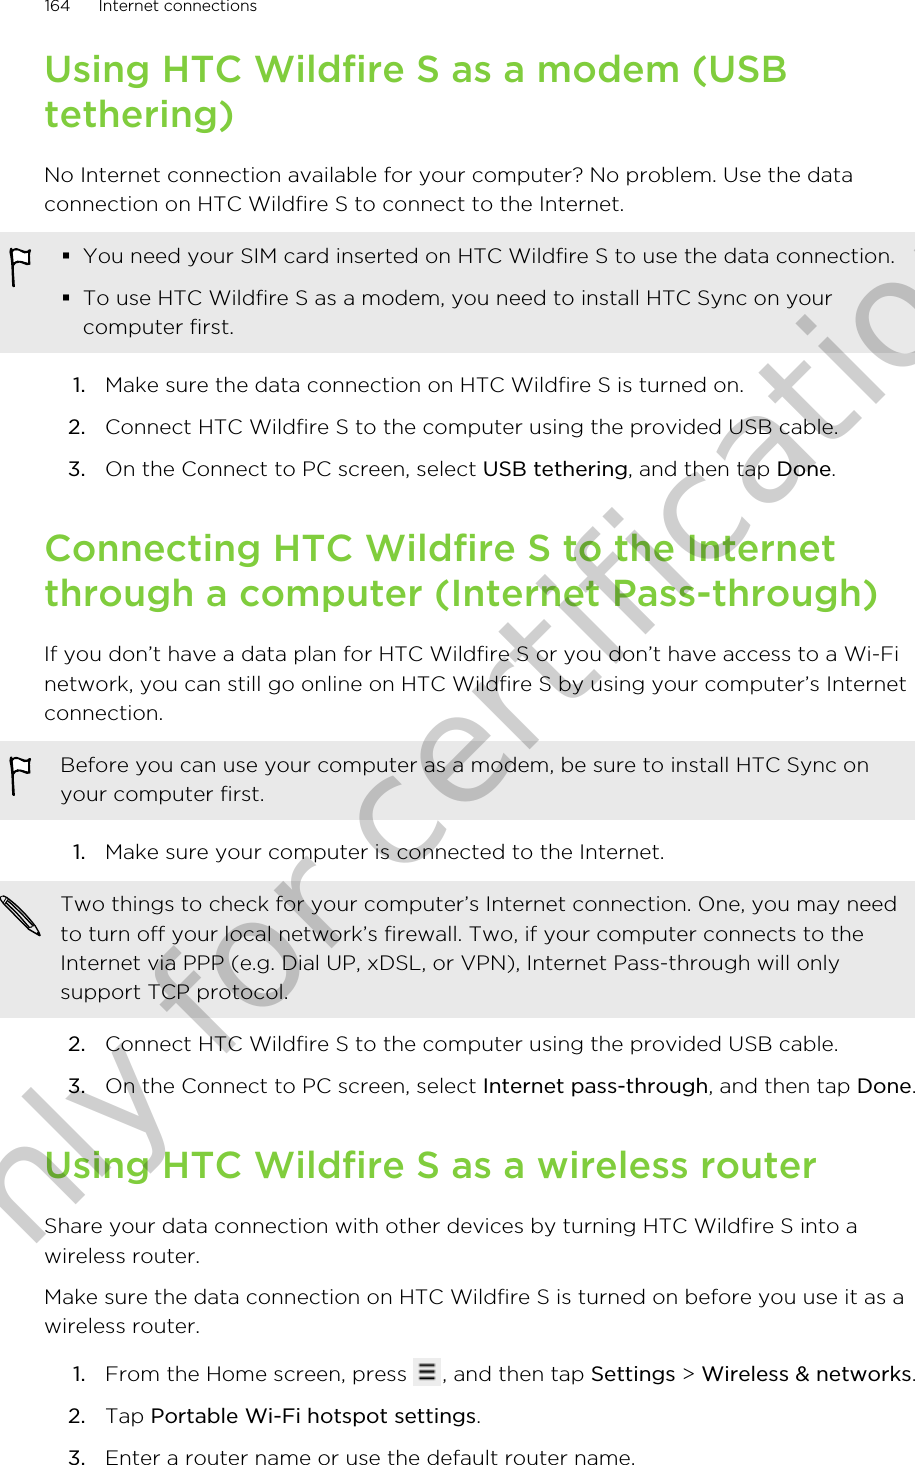 Using HTC Wildfire S as a modem (USBtethering)No Internet connection available for your computer? No problem. Use the dataconnection on HTC Wildfire S to connect to the Internet.§You need your SIM card inserted on HTC Wildfire S to use the data connection.§To use HTC Wildfire S as a modem, you need to install HTC Sync on yourcomputer first.1. Make sure the data connection on HTC Wildfire S is turned on.2. Connect HTC Wildfire S to the computer using the provided USB cable.3. On the Connect to PC screen, select USB tethering, and then tap Done.Connecting HTC Wildfire S to the Internetthrough a computer (Internet Pass-through)If you don’t have a data plan for HTC Wildfire S or you don’t have access to a Wi-Finetwork, you can still go online on HTC Wildfire S by using your computer’s Internetconnection.Before you can use your computer as a modem, be sure to install HTC Sync onyour computer first.1. Make sure your computer is connected to the Internet. Two things to check for your computer’s Internet connection. One, you may needto turn off your local network’s firewall. Two, if your computer connects to theInternet via PPP (e.g. Dial UP, xDSL, or VPN), Internet Pass-through will onlysupport TCP protocol.2. Connect HTC Wildfire S to the computer using the provided USB cable.3. On the Connect to PC screen, select Internet pass-through, and then tap Done.Using HTC Wildfire S as a wireless routerShare your data connection with other devices by turning HTC Wildfire S into awireless router.Make sure the data connection on HTC Wildfire S is turned on before you use it as awireless router.1. From the Home screen, press  , and then tap Settings &gt; Wireless &amp; networks.2. Tap Portable Wi-Fi hotspot settings.3. Enter a router name or use the default router name.164 Internet connectionsOnly for certification